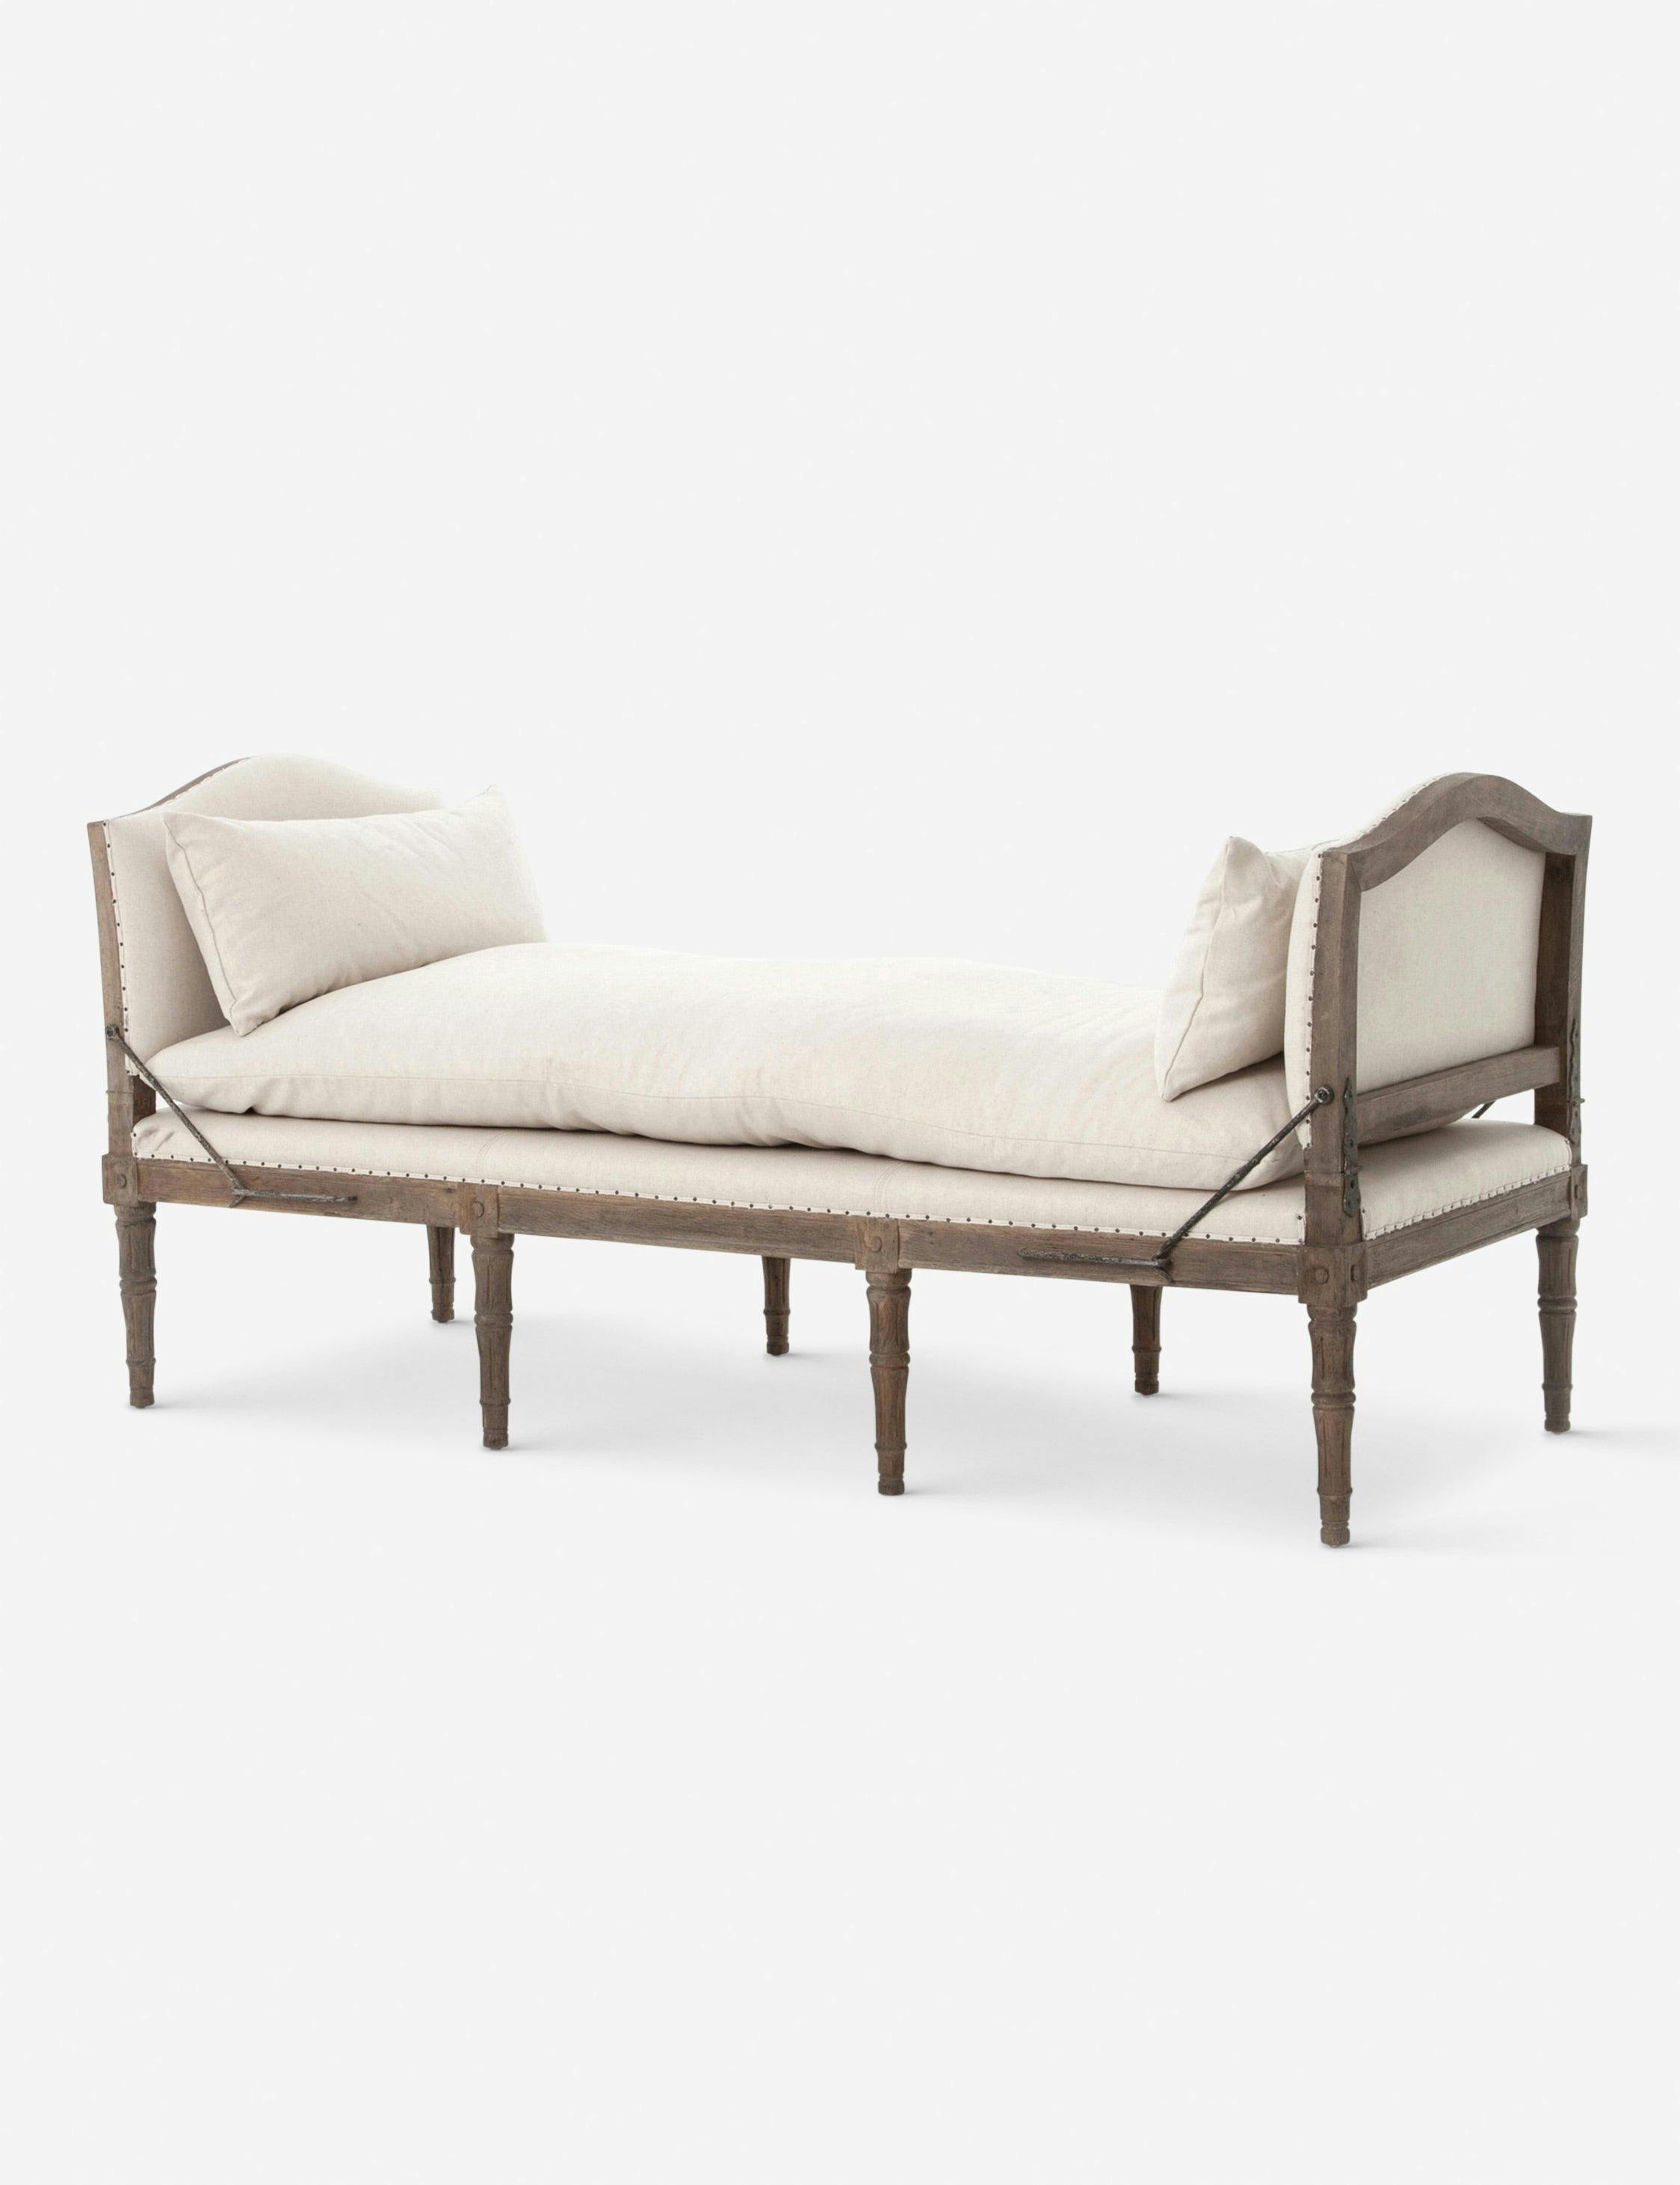 Harbor Natural Handcrafted Wood Chaise with Ivory Cushions